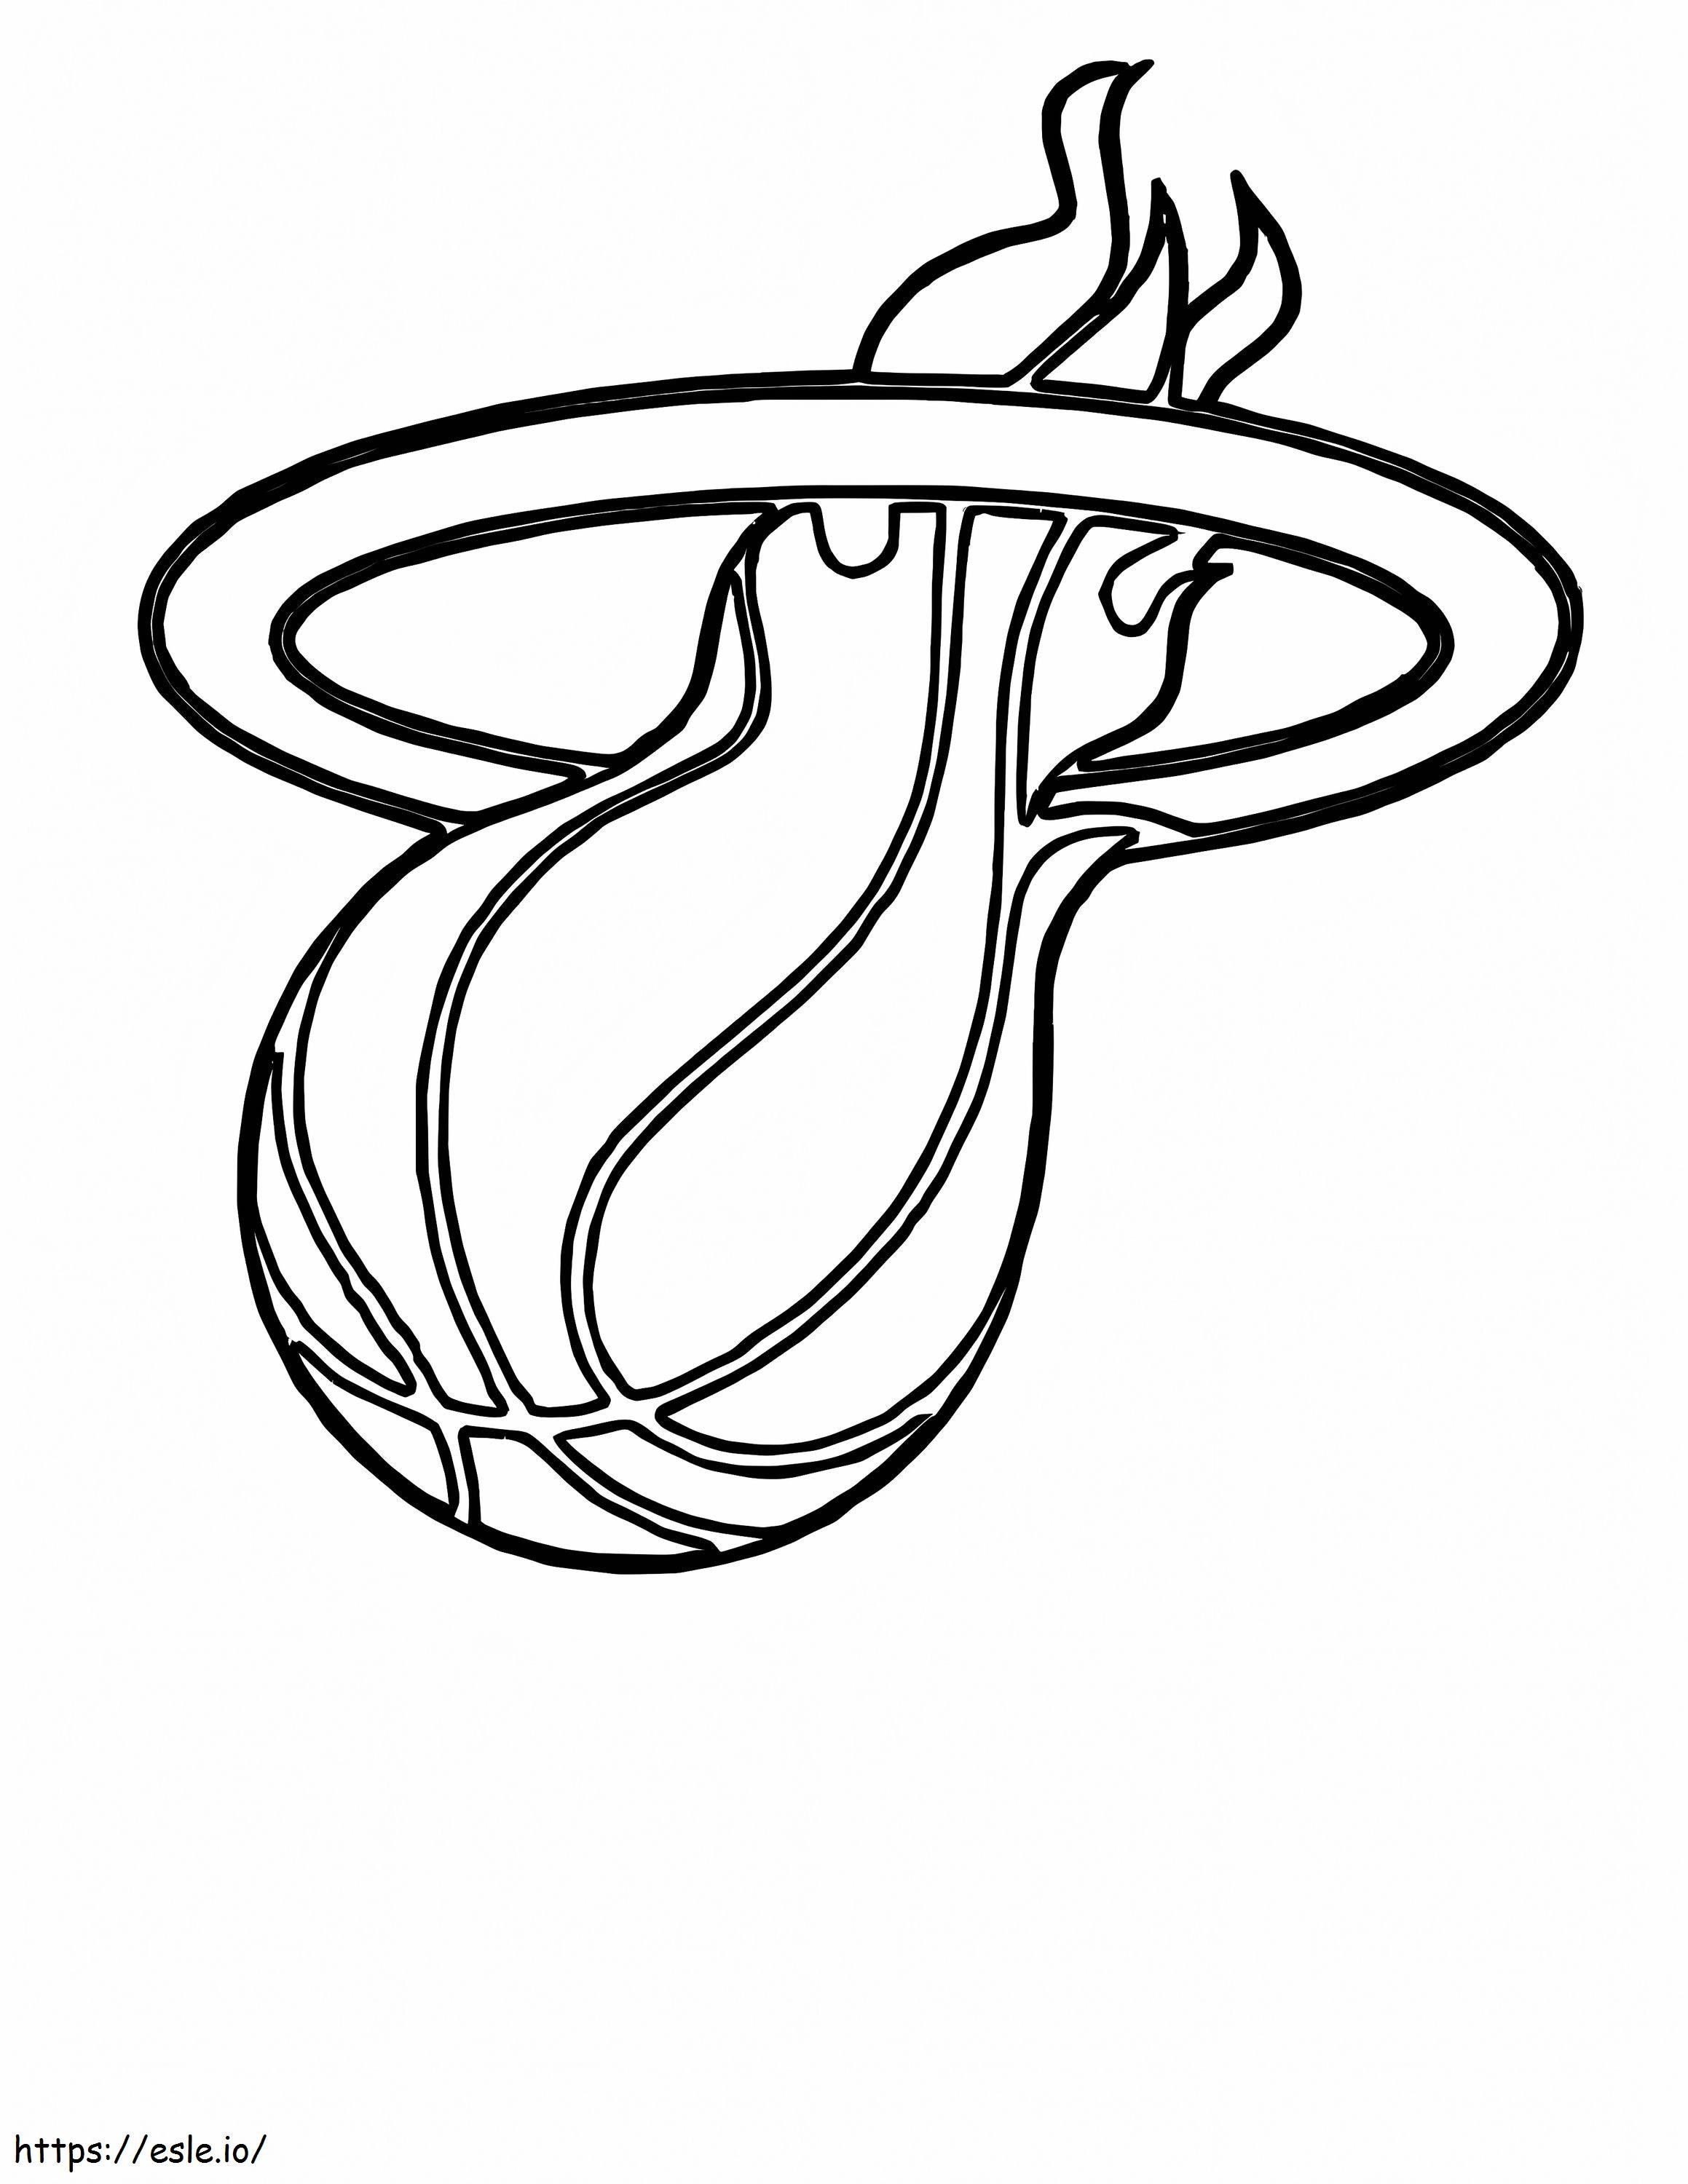 Basketball Miami Heat coloring page